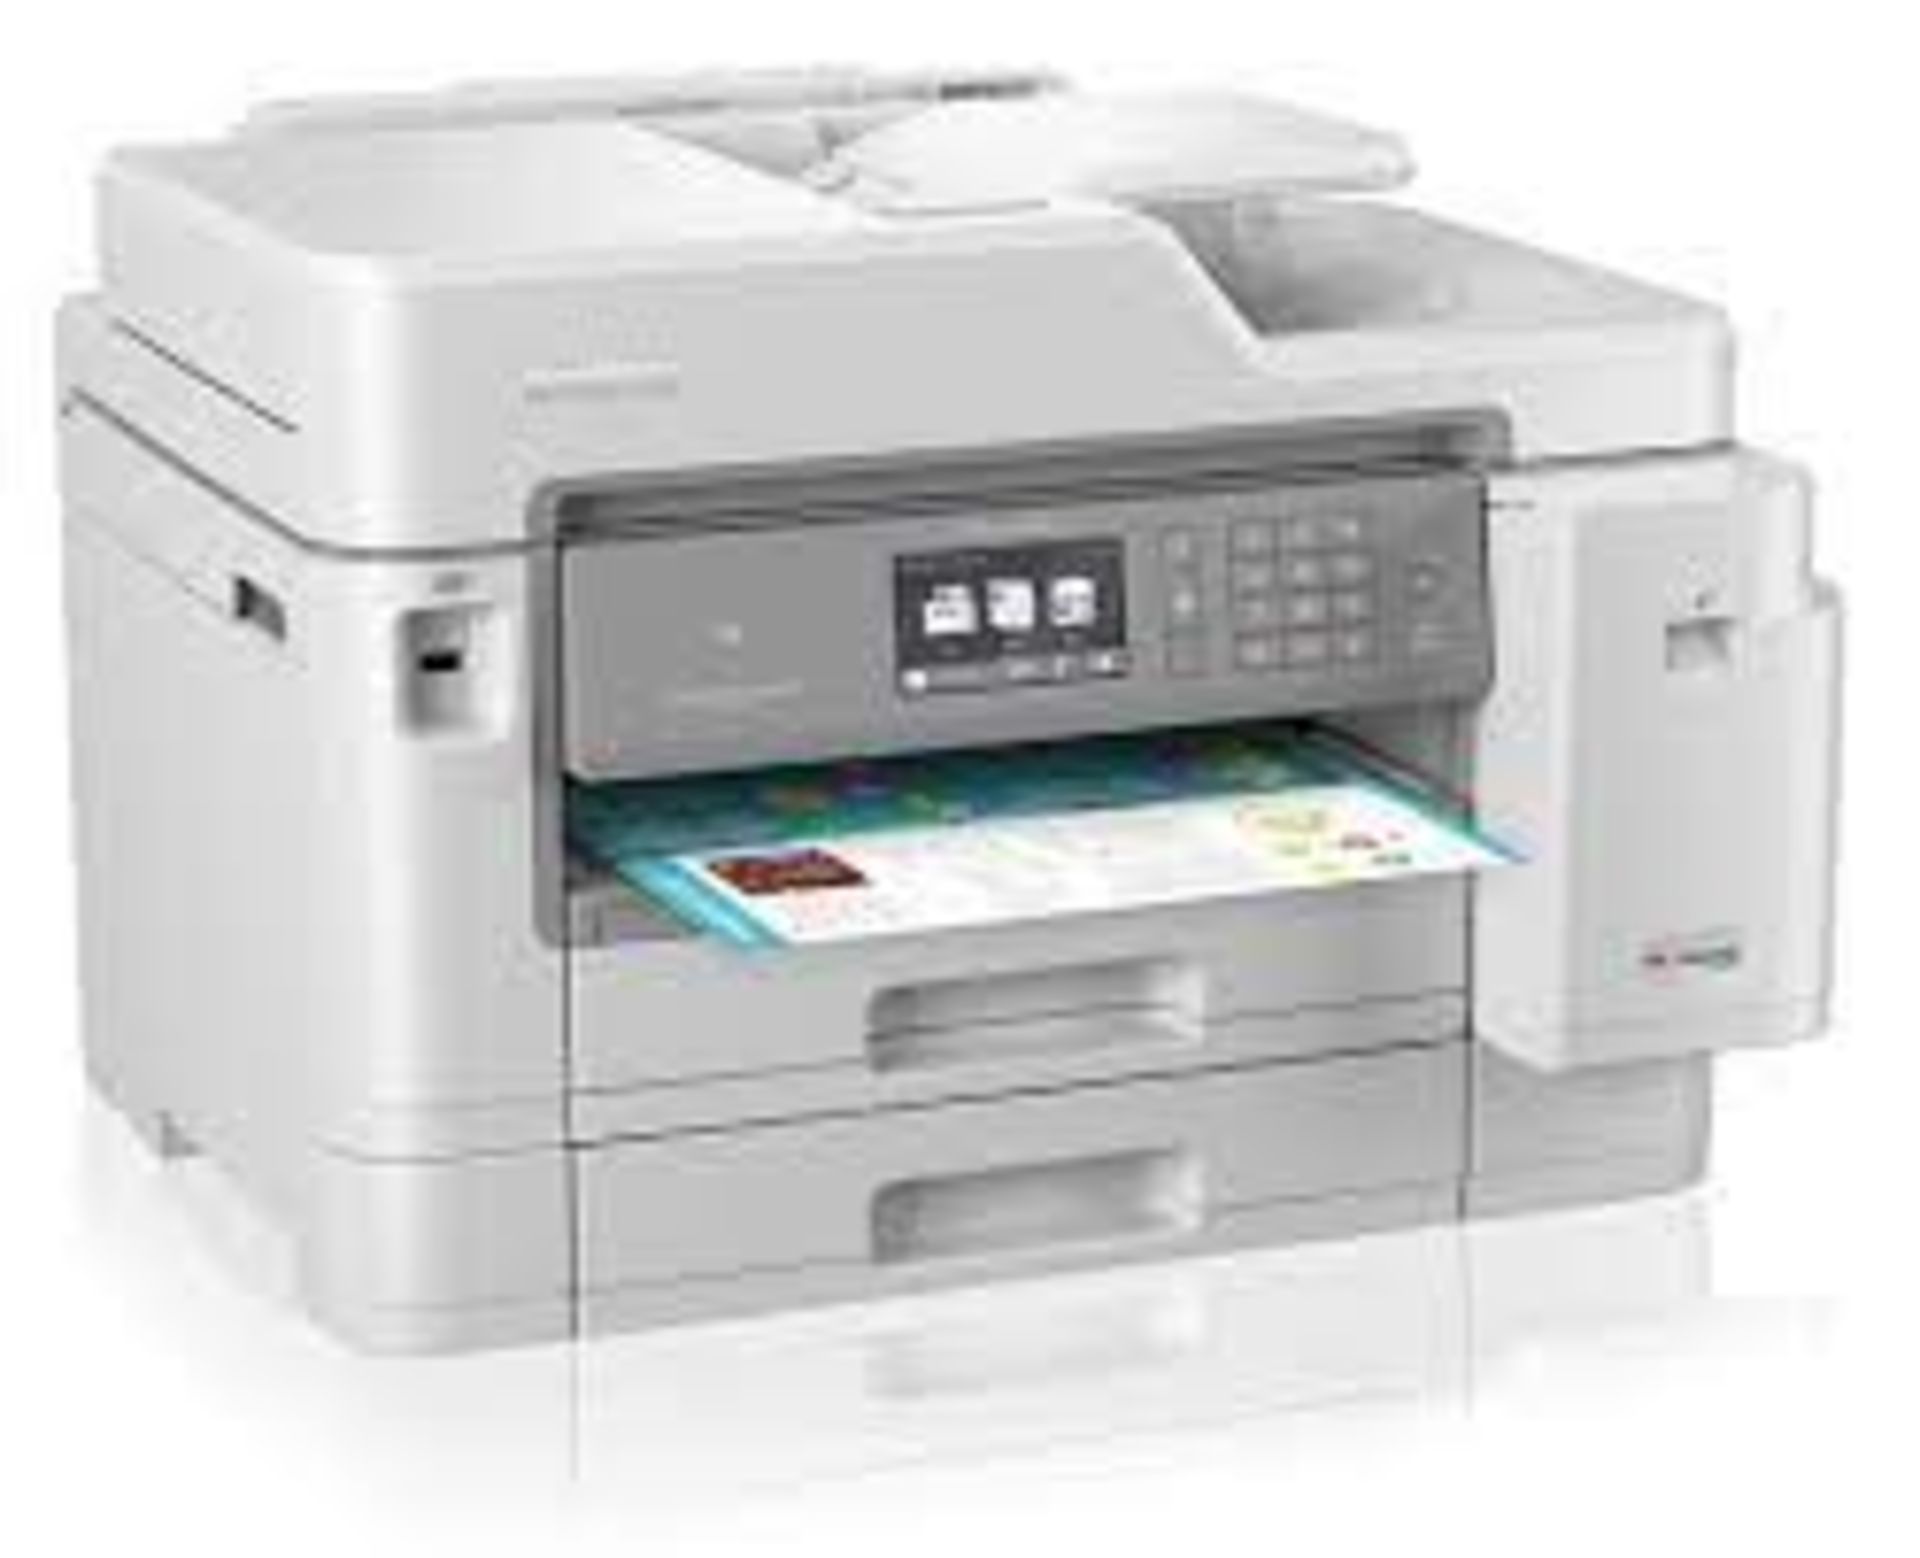 BRAND NEW BROTHER MFC-J5945DW 4 IN 1 COLOUR INKJET PRINTER RRP £459 S1P